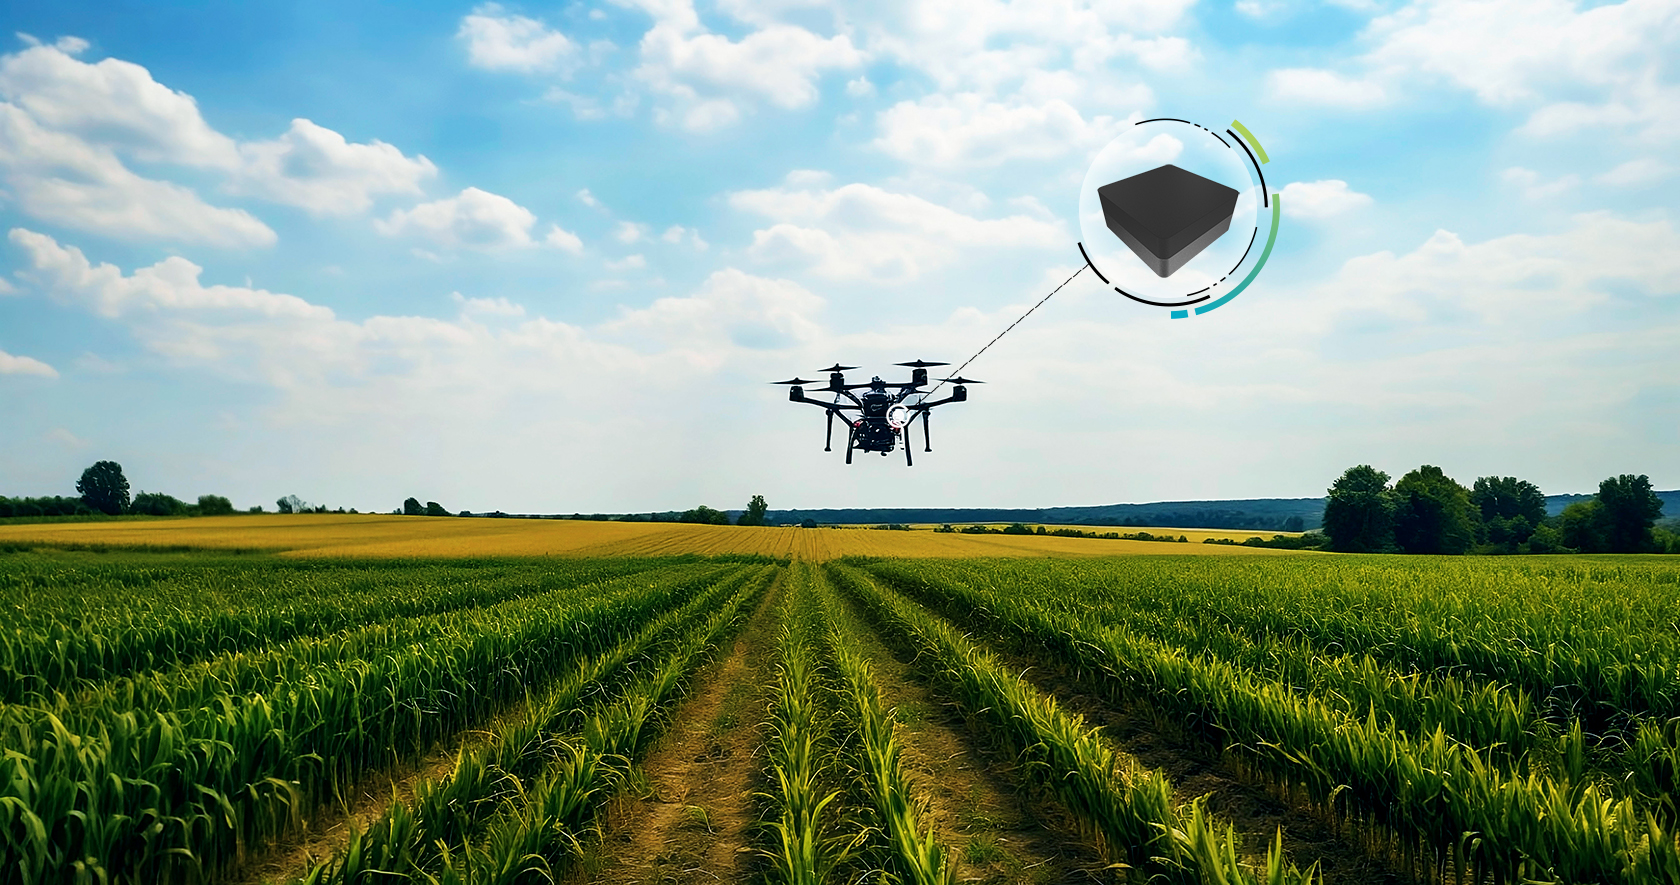 Drone flying over an agriculture field with a callout to an Antcom 1.2G antenna